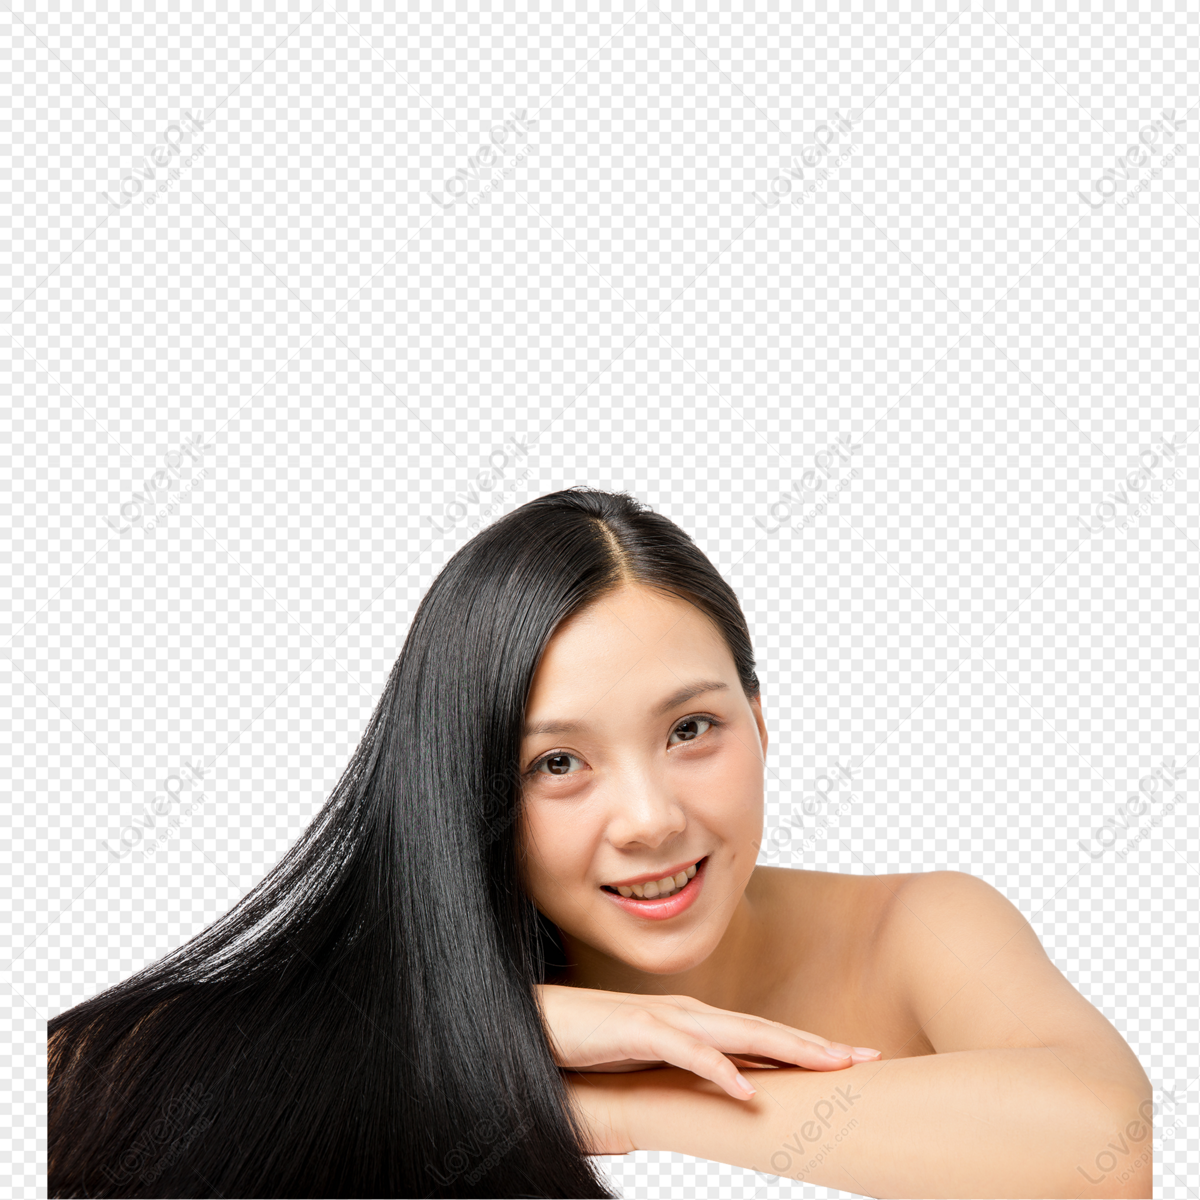 Female Hair Care Hair Care Material Free Element Free Png And Clipart Image For Free Download 6356